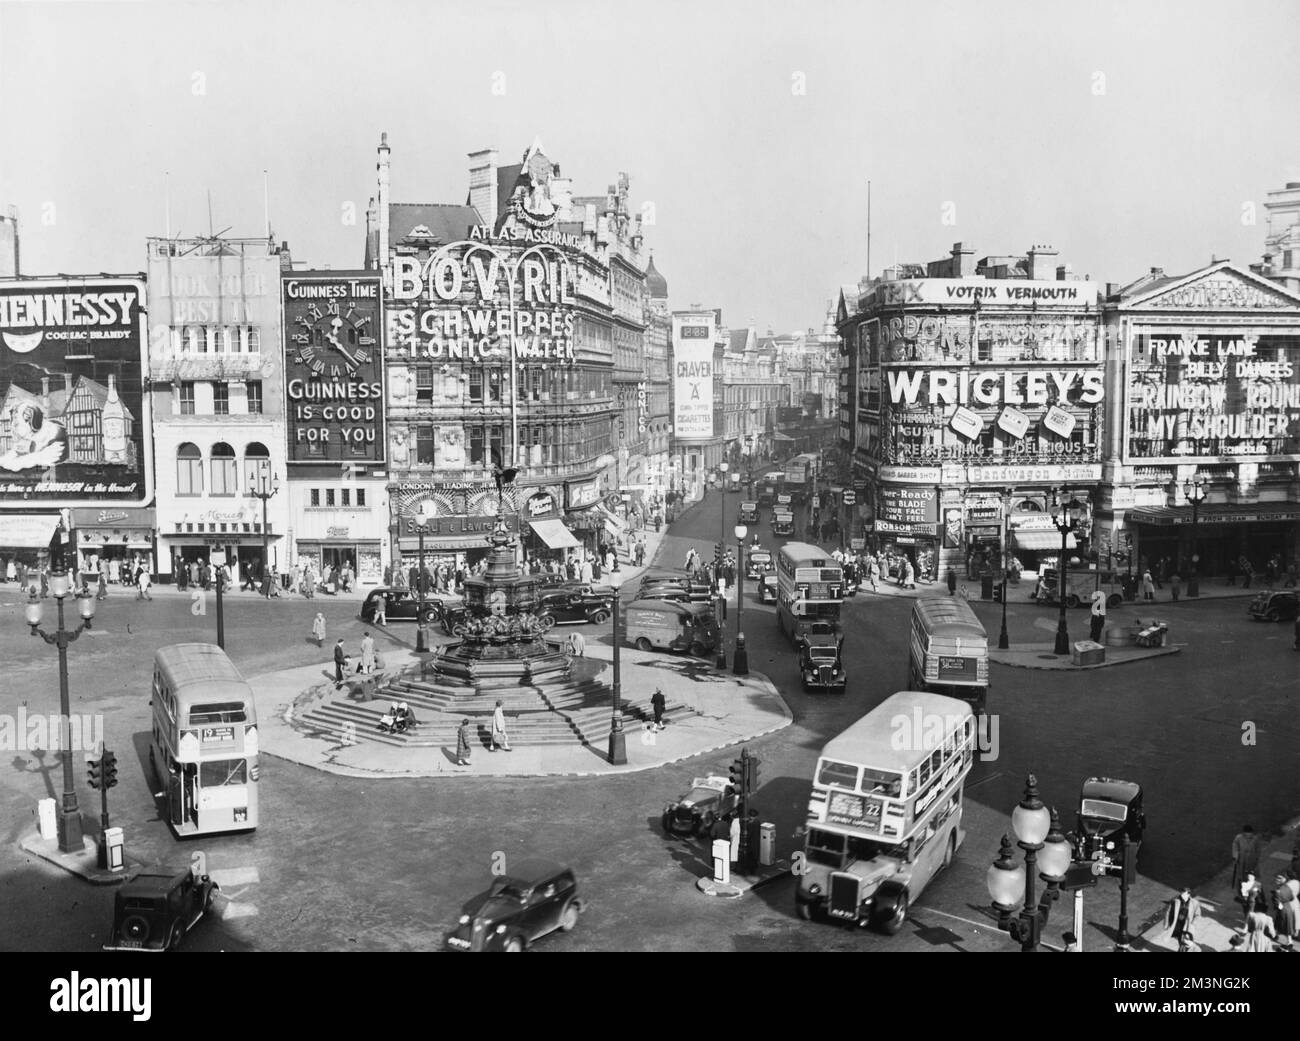 Piccadilly Circus, London, with buses and cars rounding the Statue of Eros. Rainbow Round My Shoulder starring Frankie Laine and Billy Daniels is showing at the London Pavilion. Illuminated advertisements include Bovril, Schweppes, Guinness and Wrigley's.     Date: 1952 Stock Photo